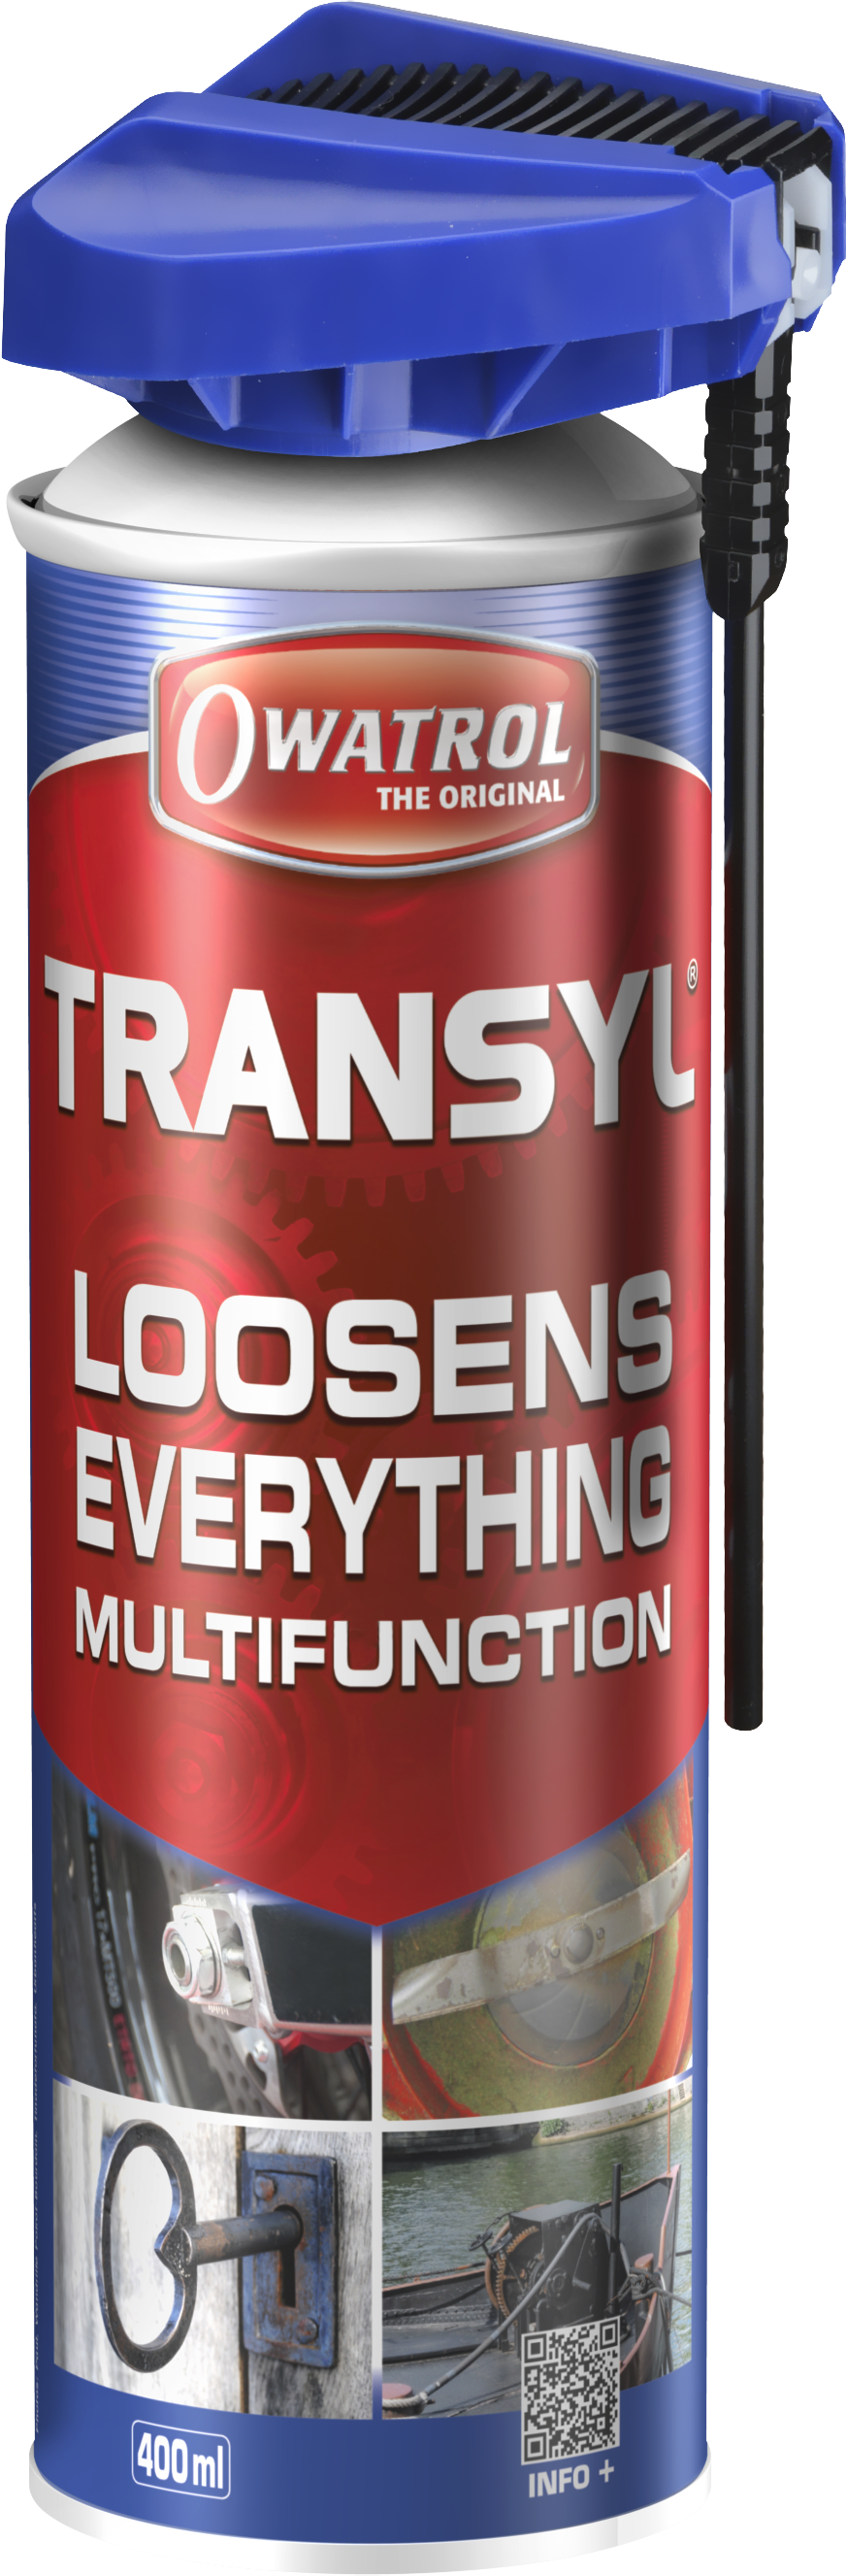 If Transyl Does Not Open It... You Are In Big Trouble